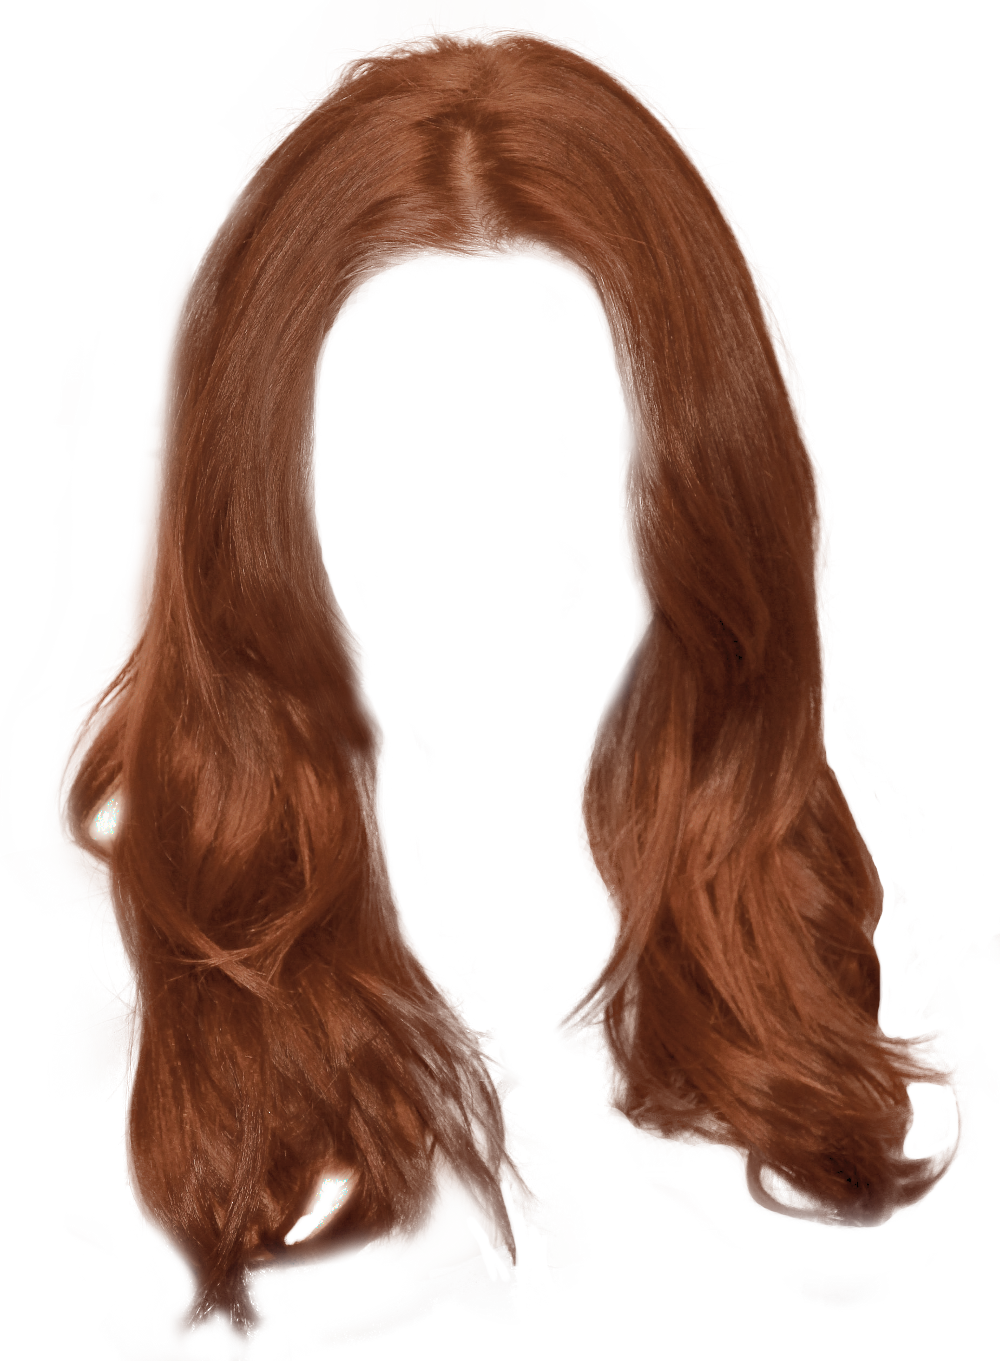 Women hair PNG image transparent image download, size: 1000x1361px